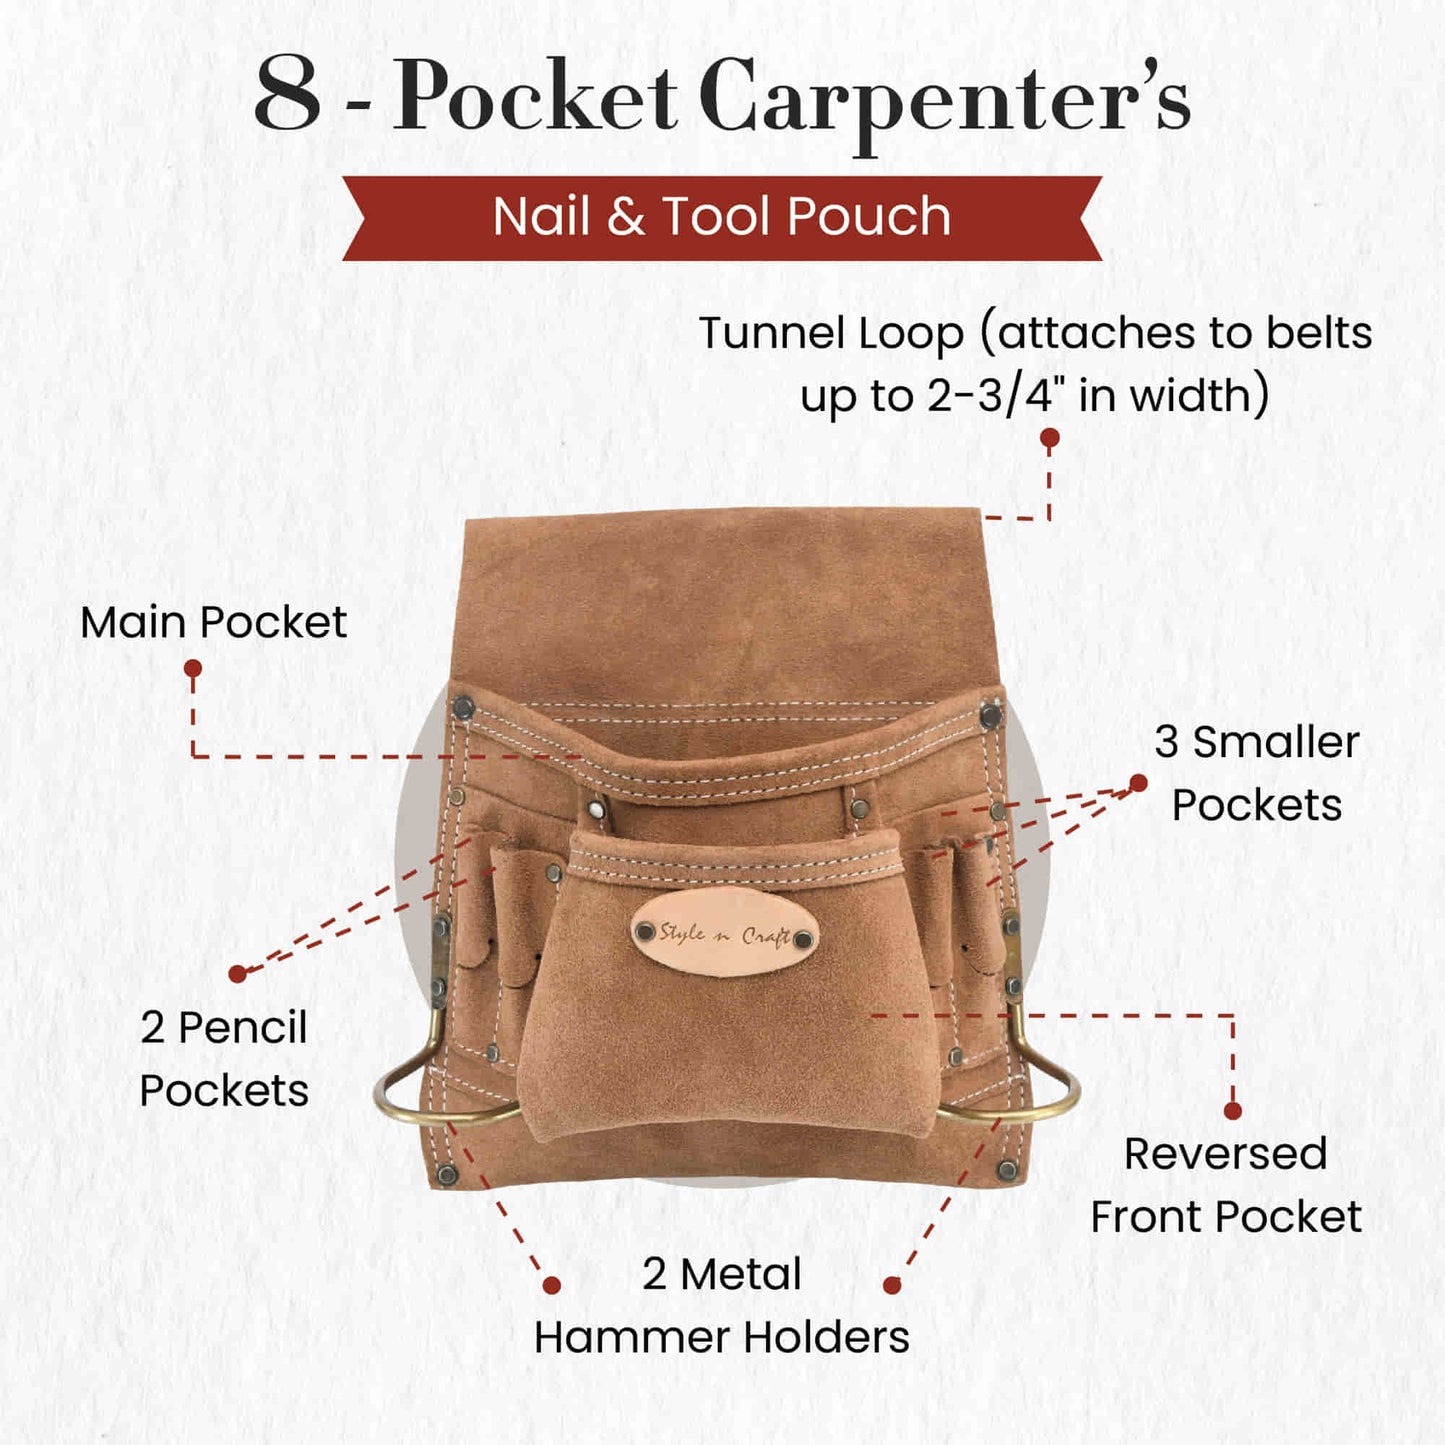 Style n Craft's 88823 - 8 Pocket Carpenter's Nail and Tool Pouch in Heavy Duty Suede Leather in Dark Tan Color - Front View Showing the Details.